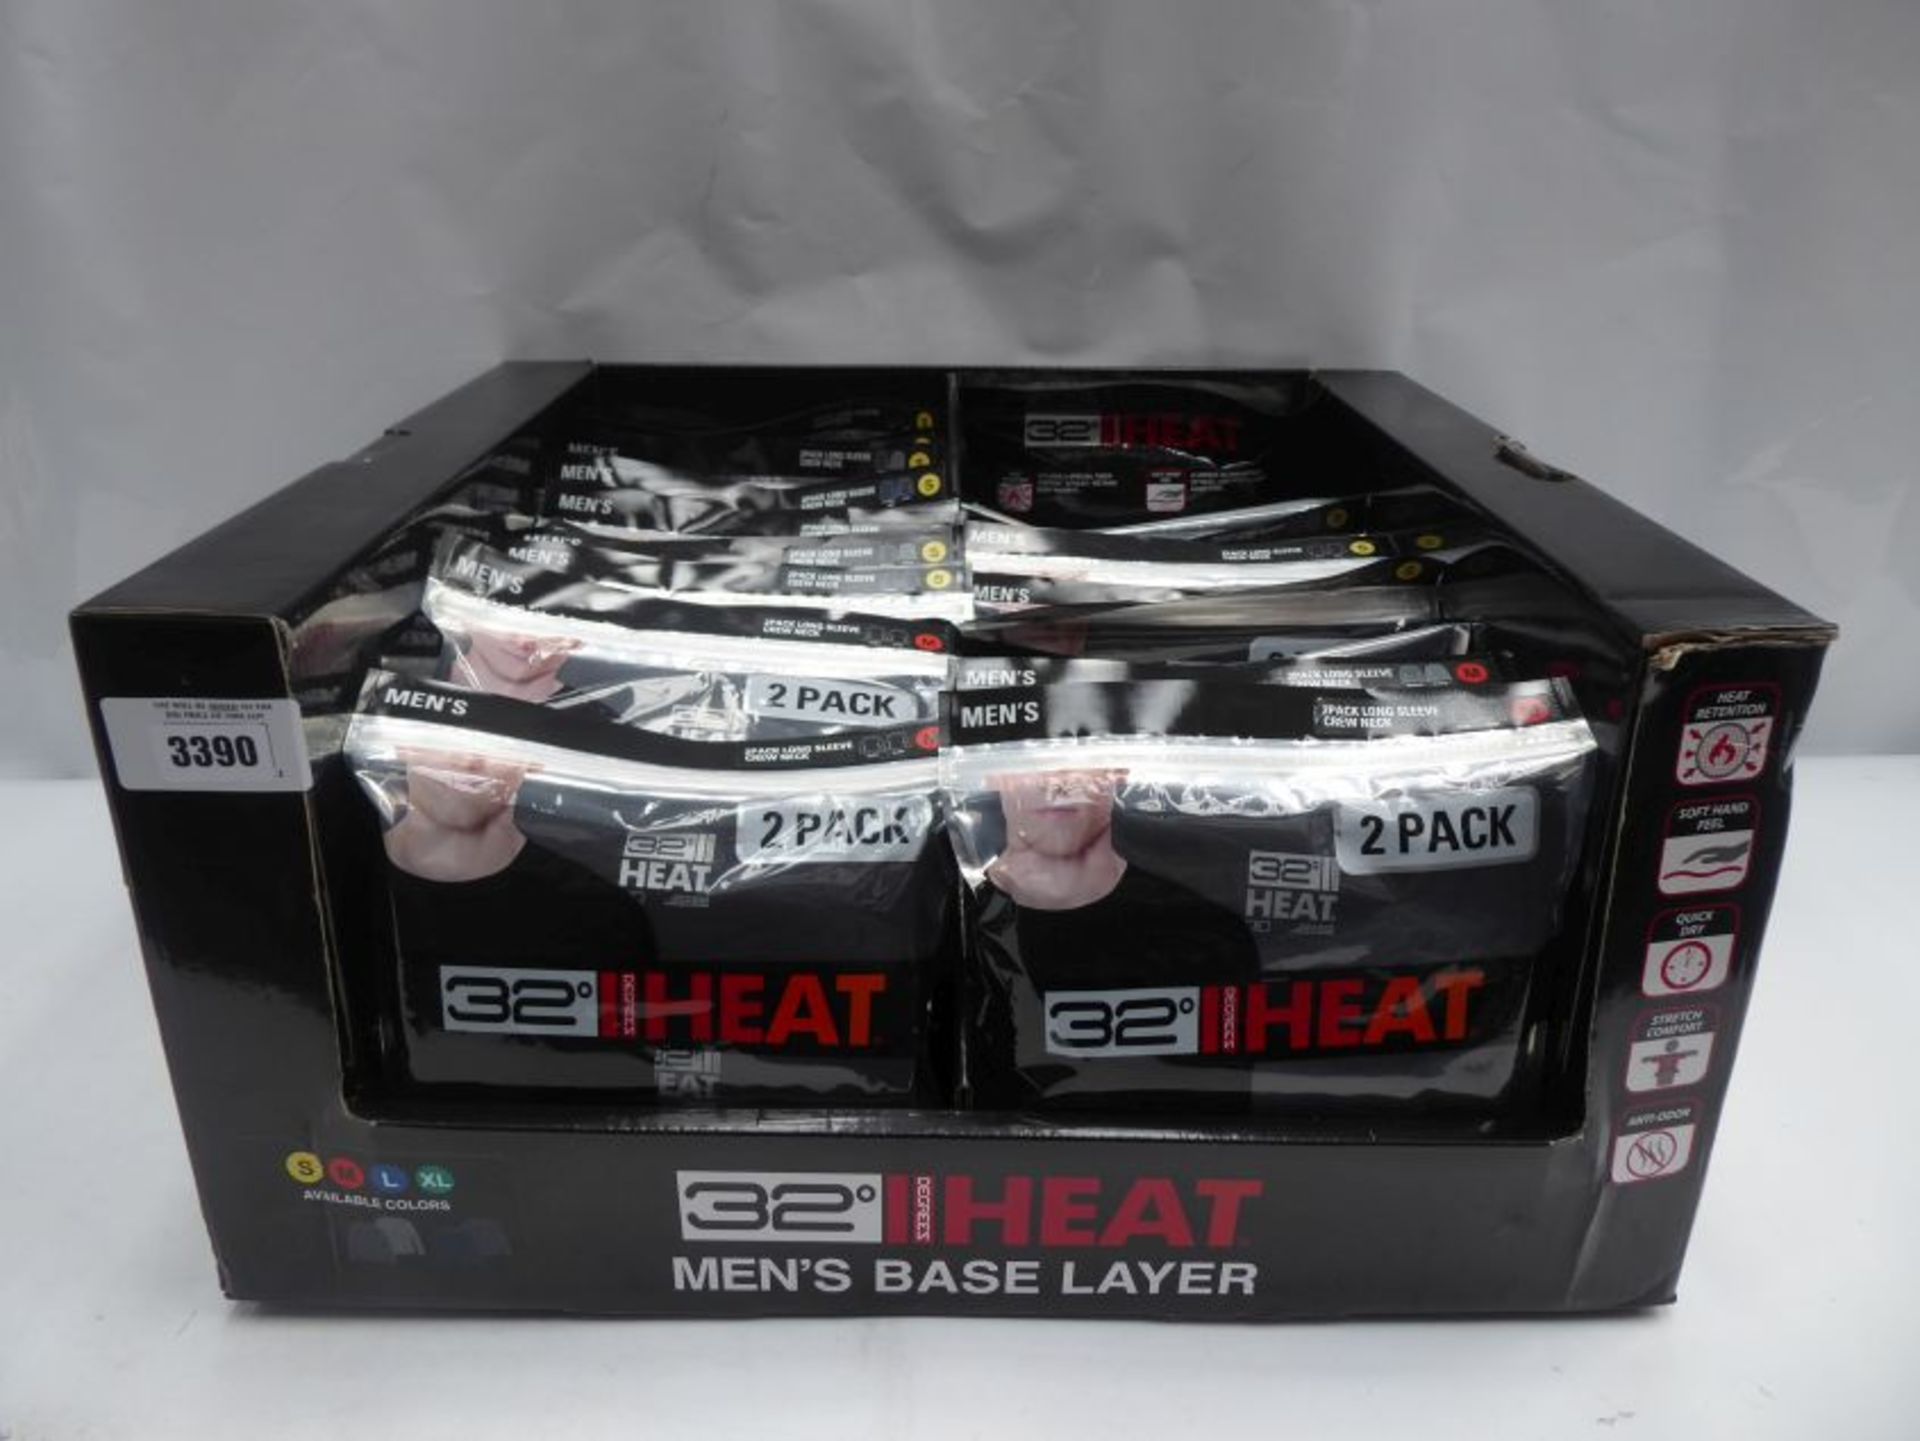 Box containing 24 packs of 32 Degree Heat long sleeved crew neck t-shirts (2 x t-shirt per pack)